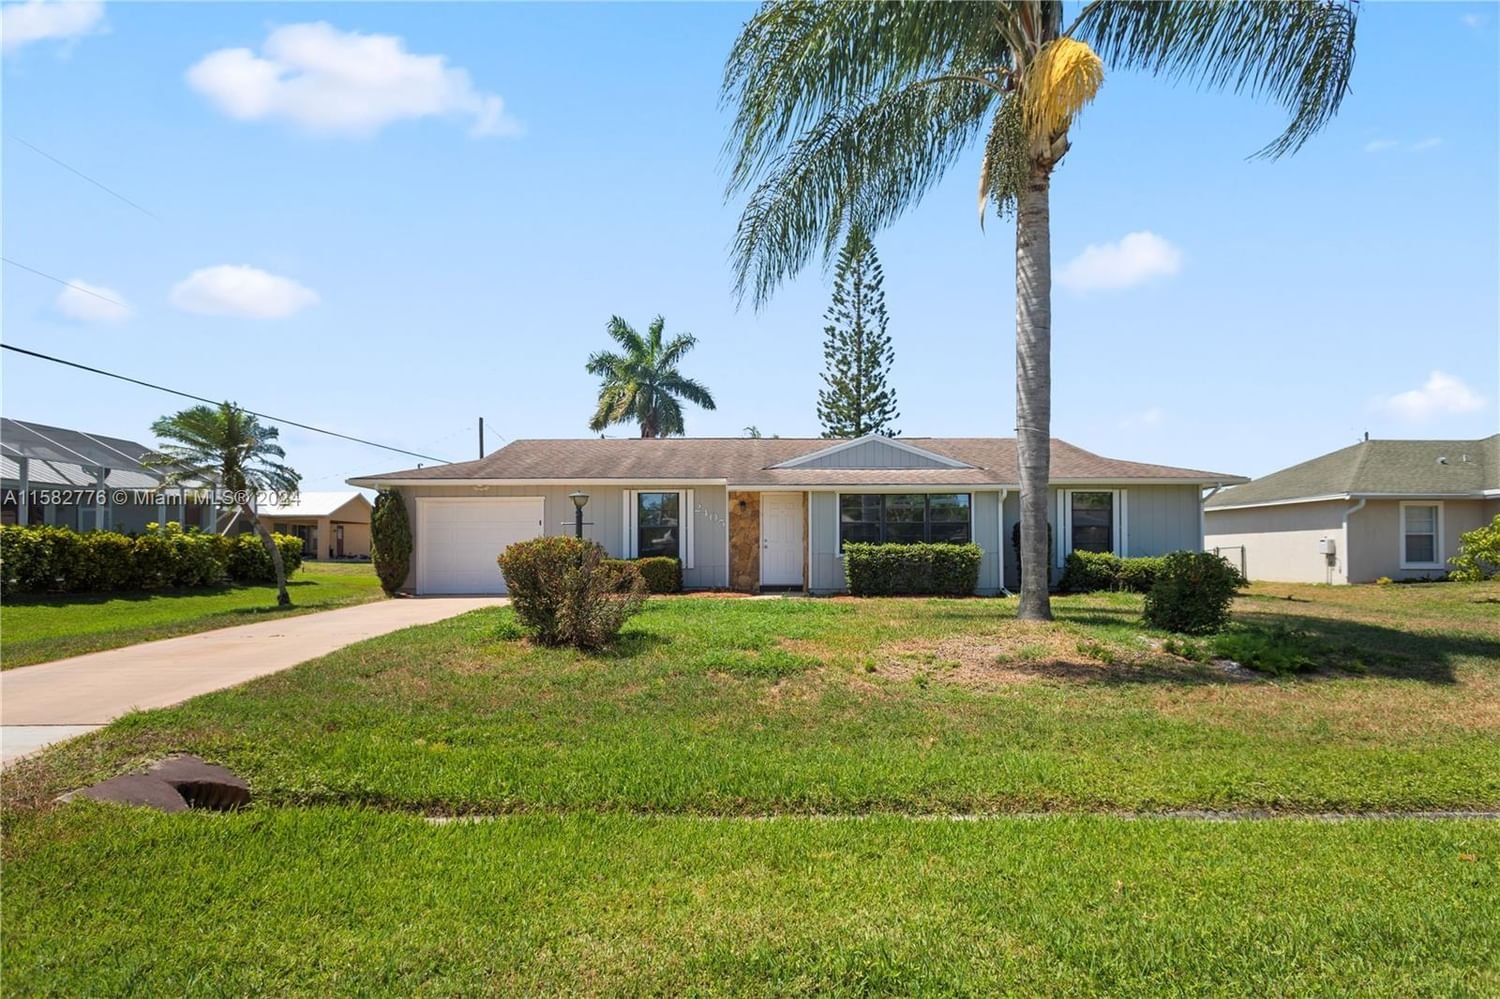 Real estate property located at 2405 Falcon Cir, St Lucie County, PORT ST LUCIE SECTION 5, Port St. Lucie, FL